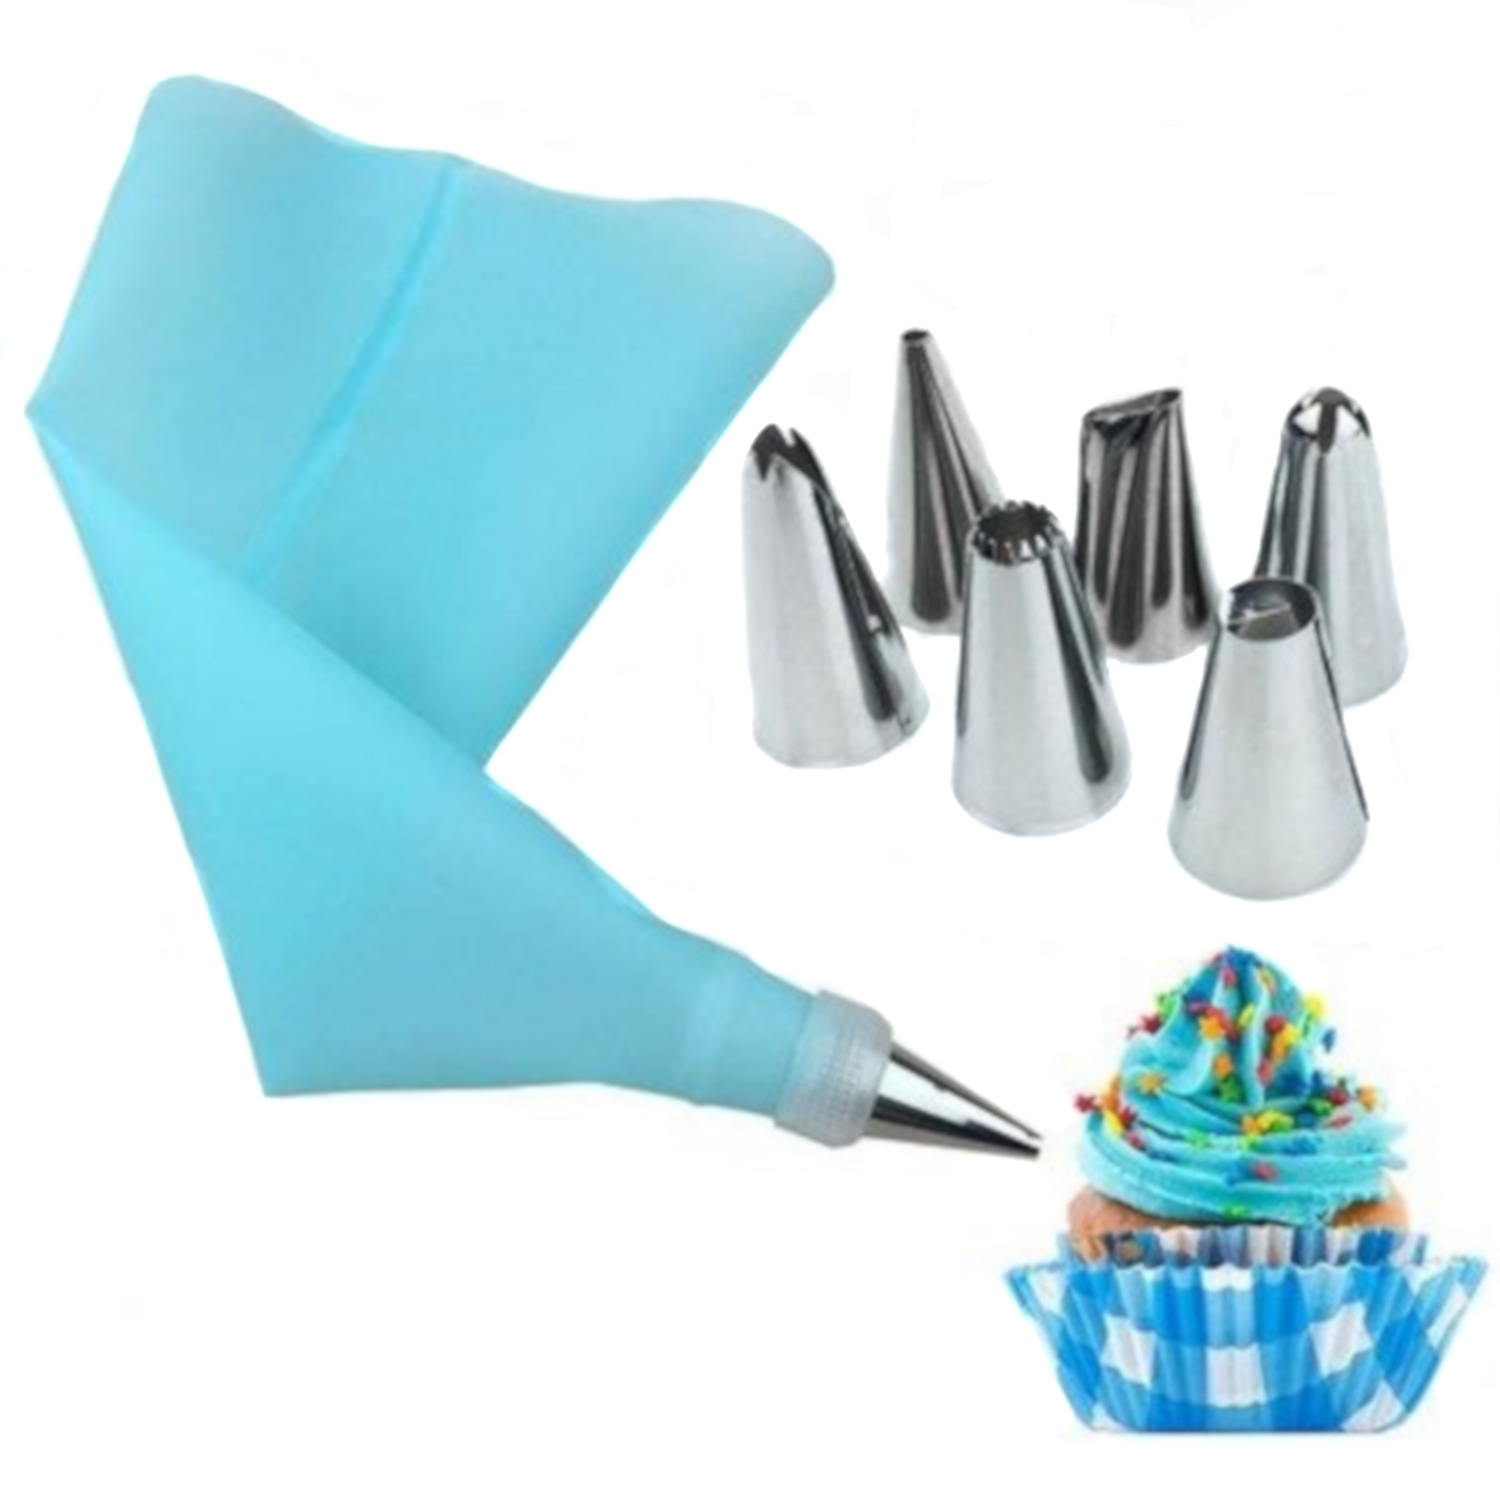 6 Stainless Steel Nozzles With Pastry Bag And Converter